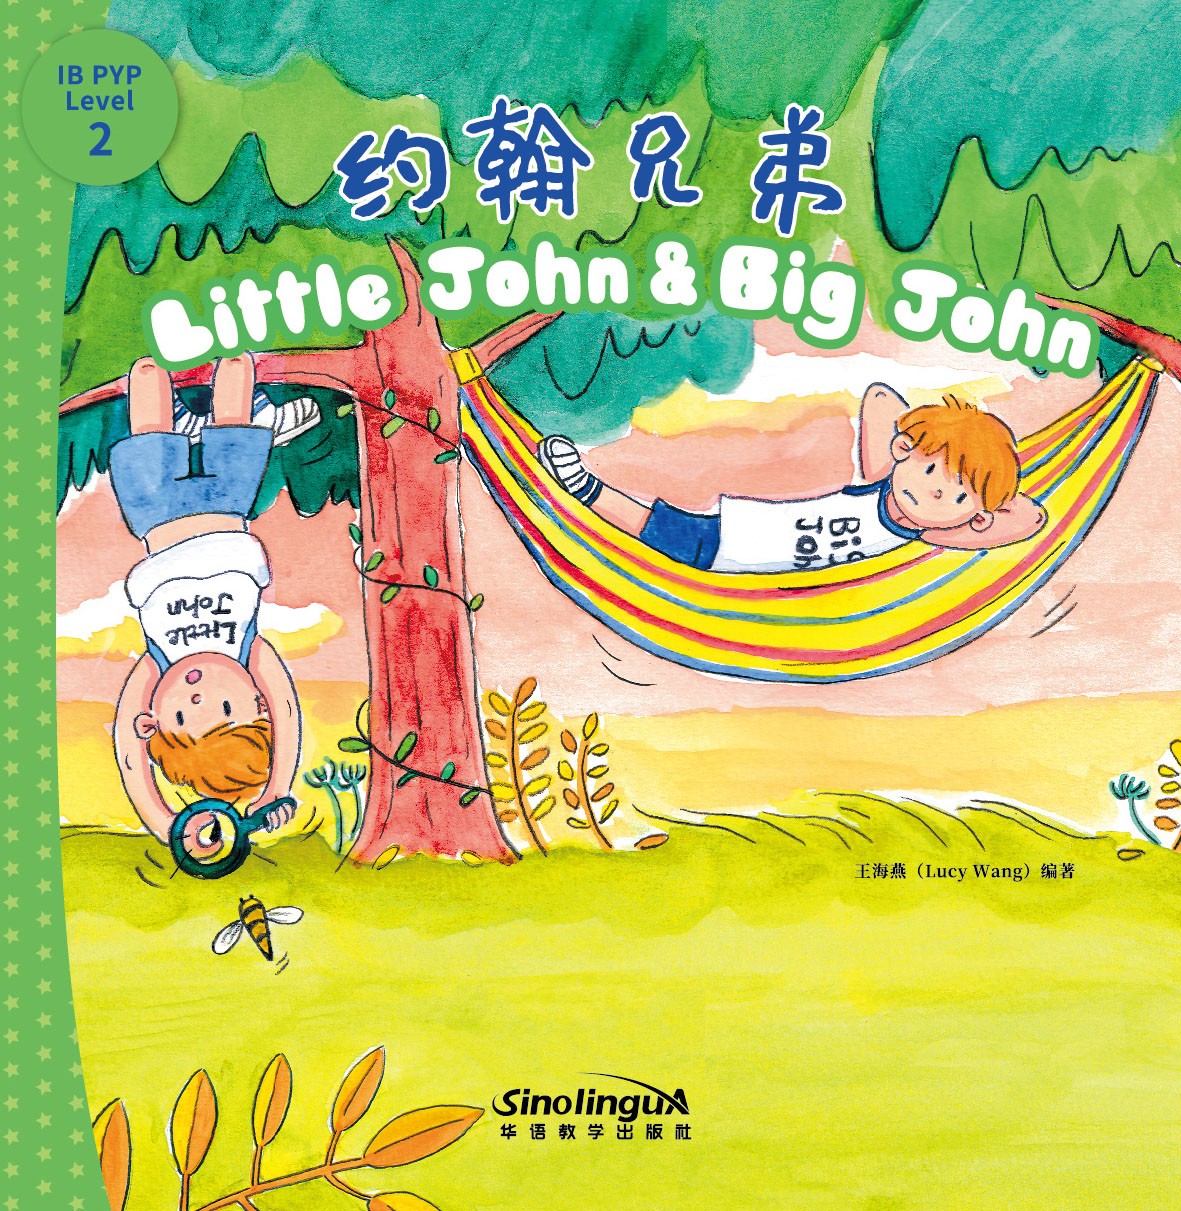 I Can Read by Myself:IB PYP Inquiry Graded Readers(Level Two)-Little John & Big John